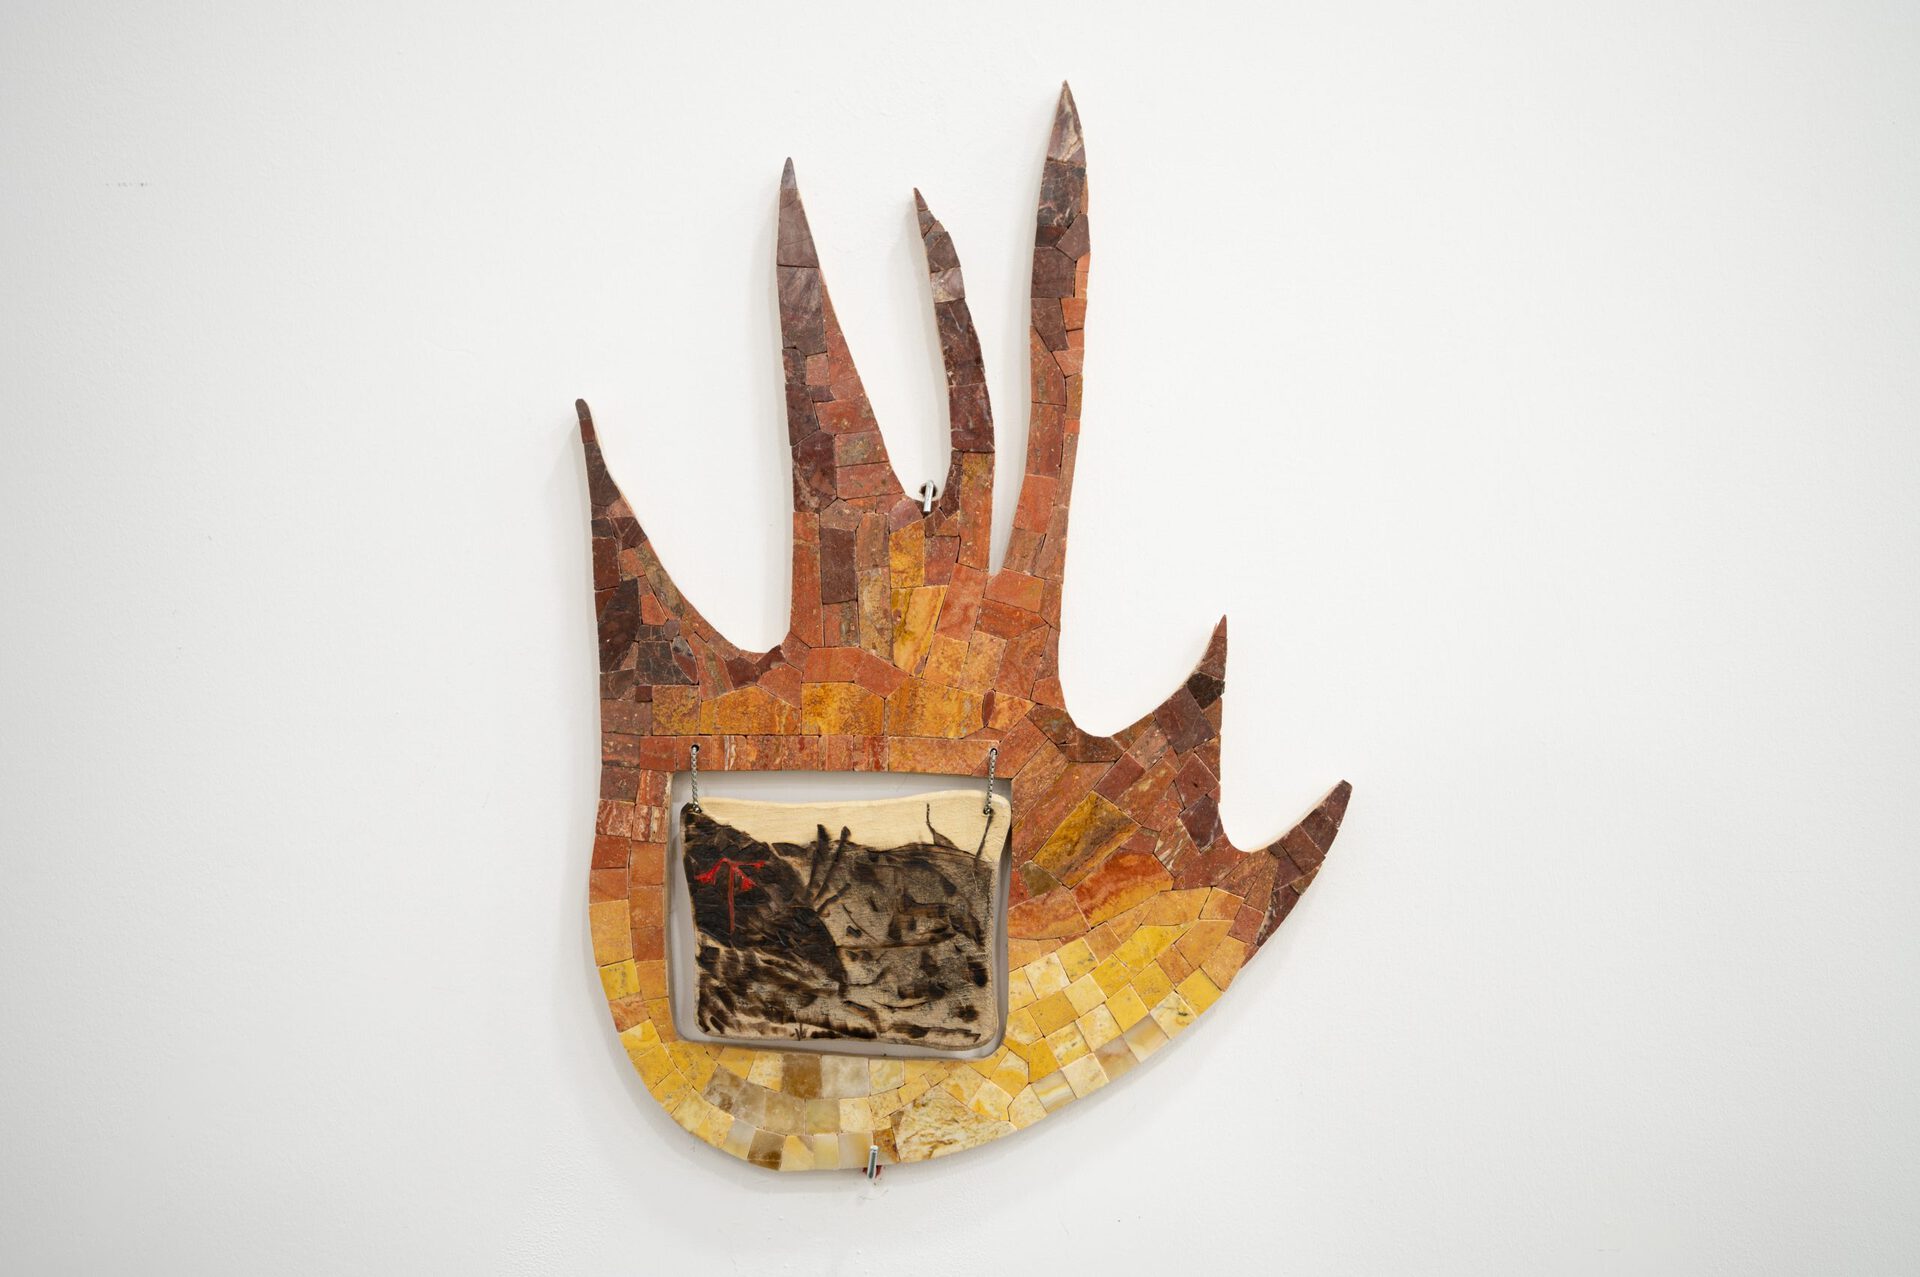 Gvantsa Jishkariani, RISING FROM THE ASHES AFTER FIRES,2022 Marble, Travertine, Onyx mosaic, silver chain, Pastel and pencils on burnt wood plate 35 x 48 x 1,5 cm